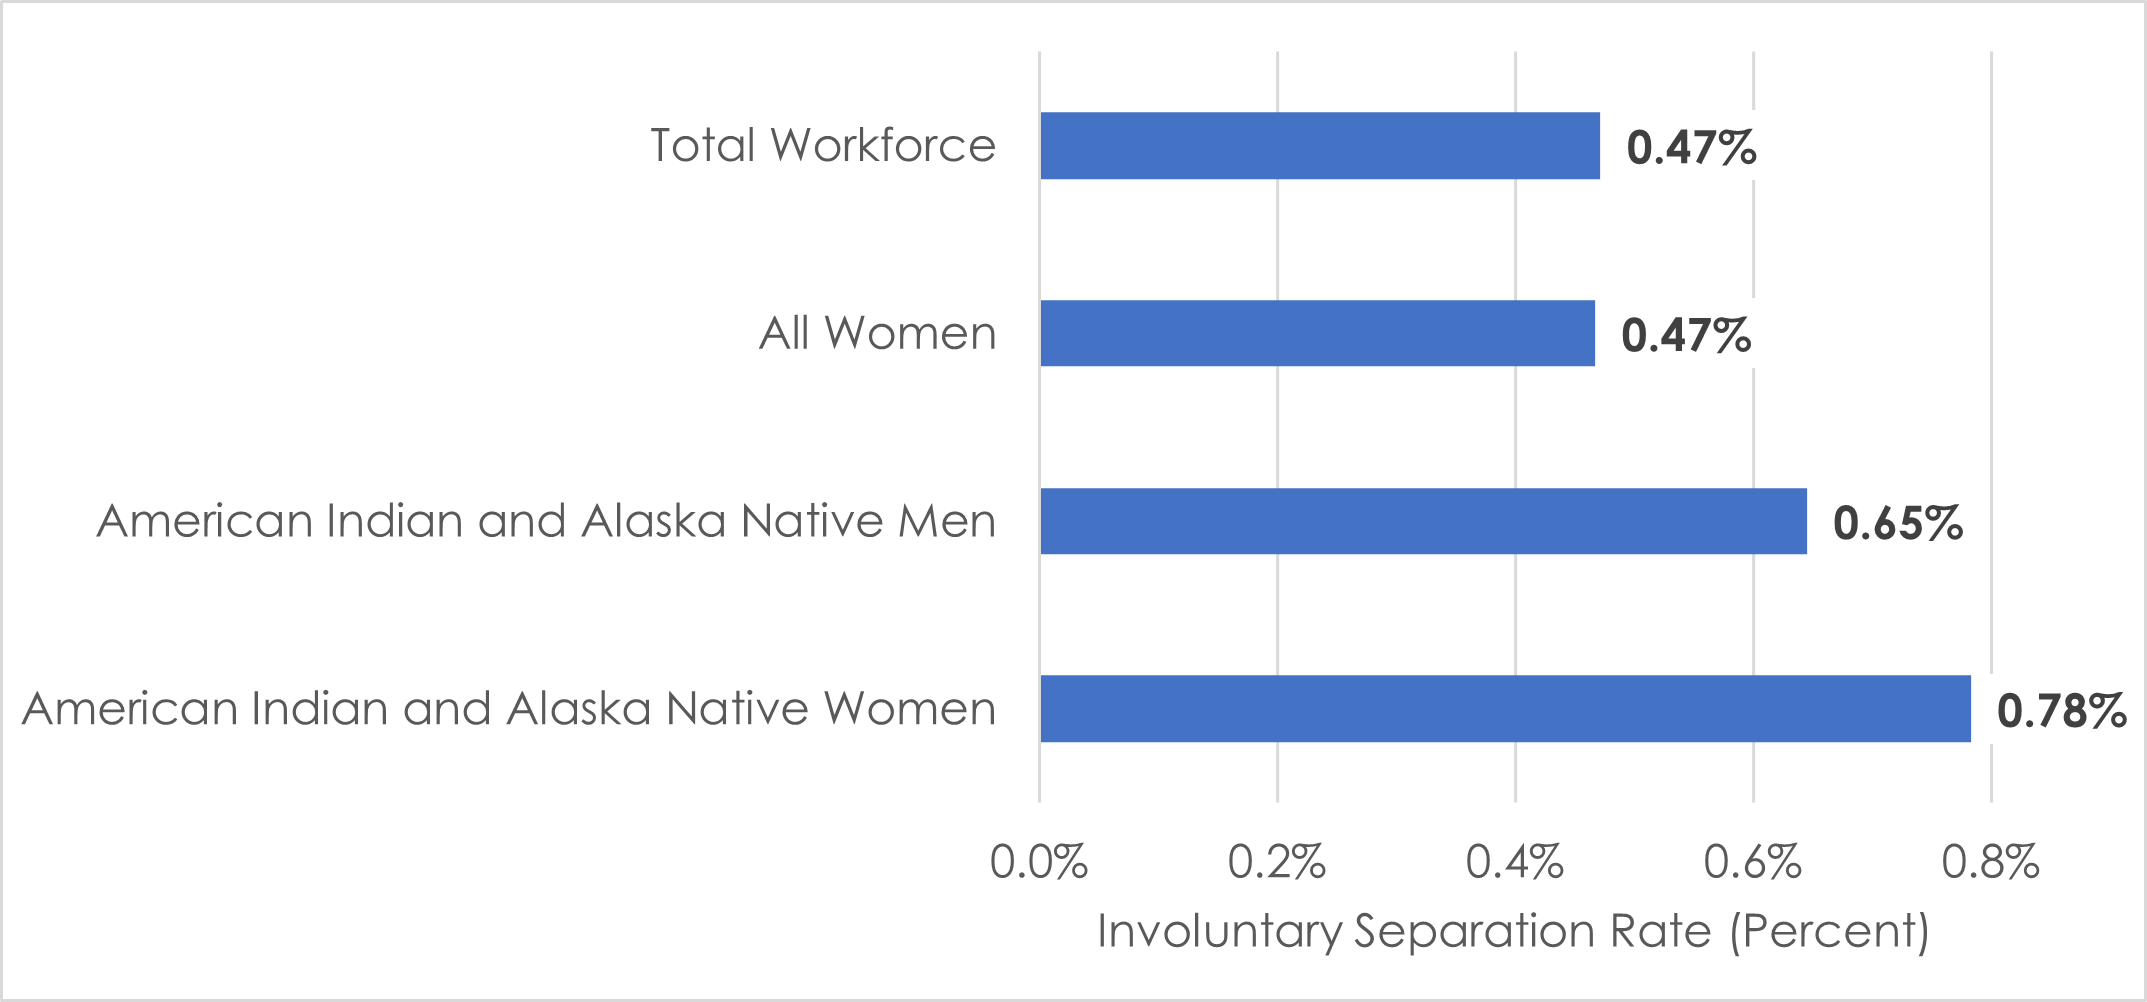 0.47% federal employees involuntary separate.  0.47% women involuntary separate in the federal sector.  0.65% AIAN men involuntary separate in the federal sector.  0.78% AIAN women involuntary separate in the federal sector